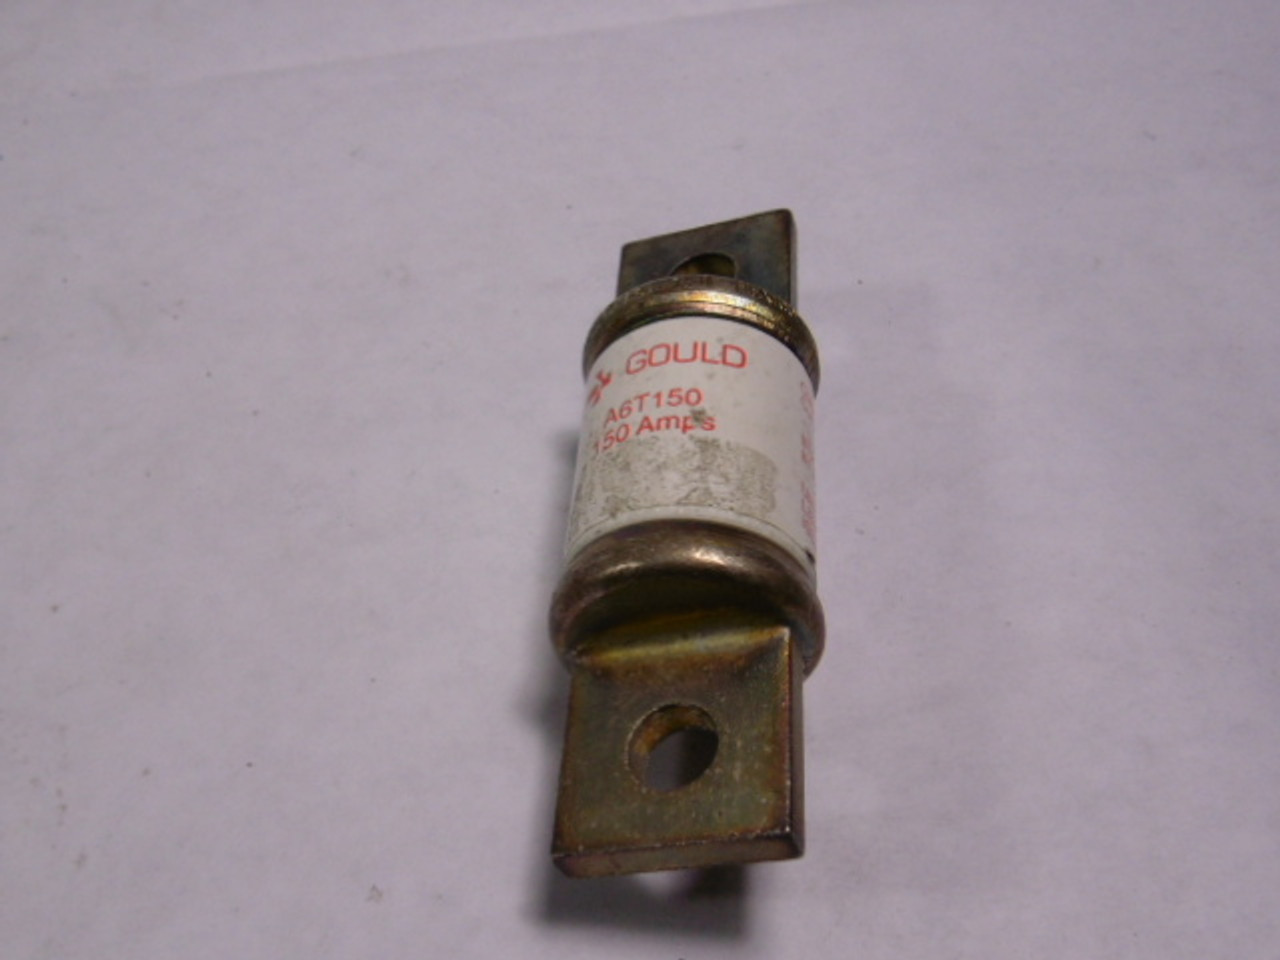 Gould A6T150 Current Limiting Fuse 150A 600V 300Vdc USED